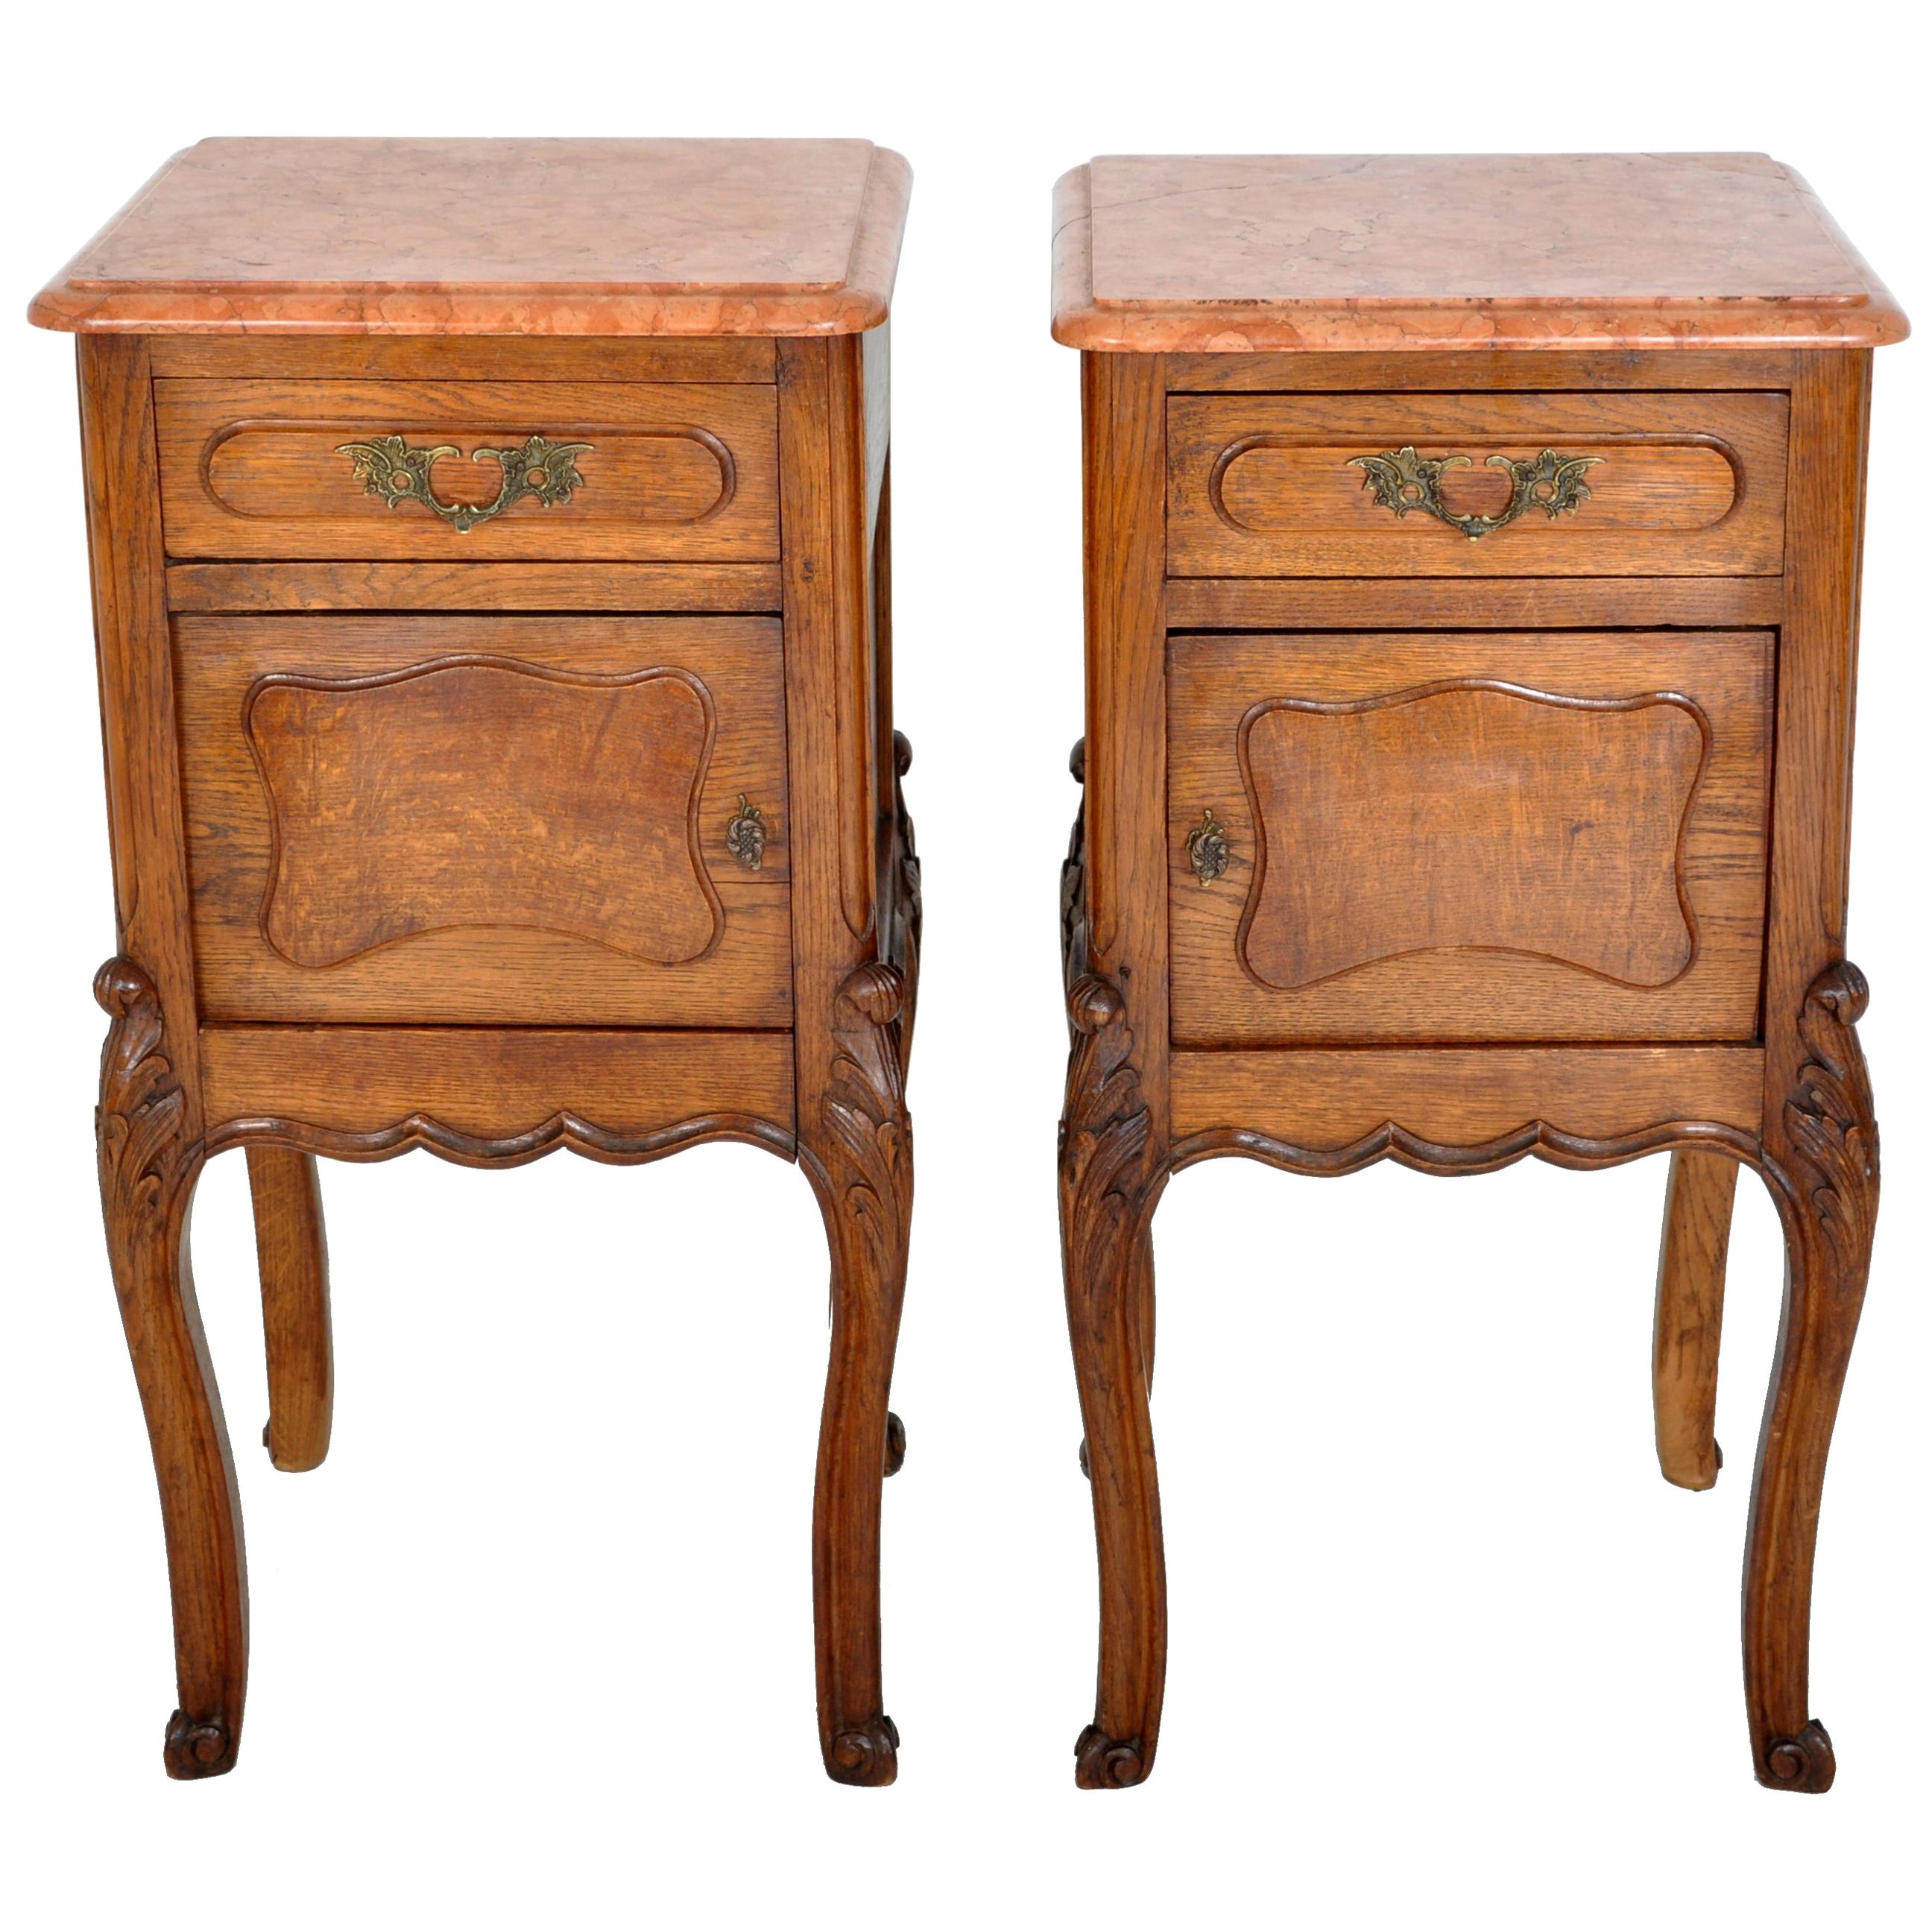 Pair of Antique French Provincial Carved Oak Marble-Top Nightstands, circa 1890